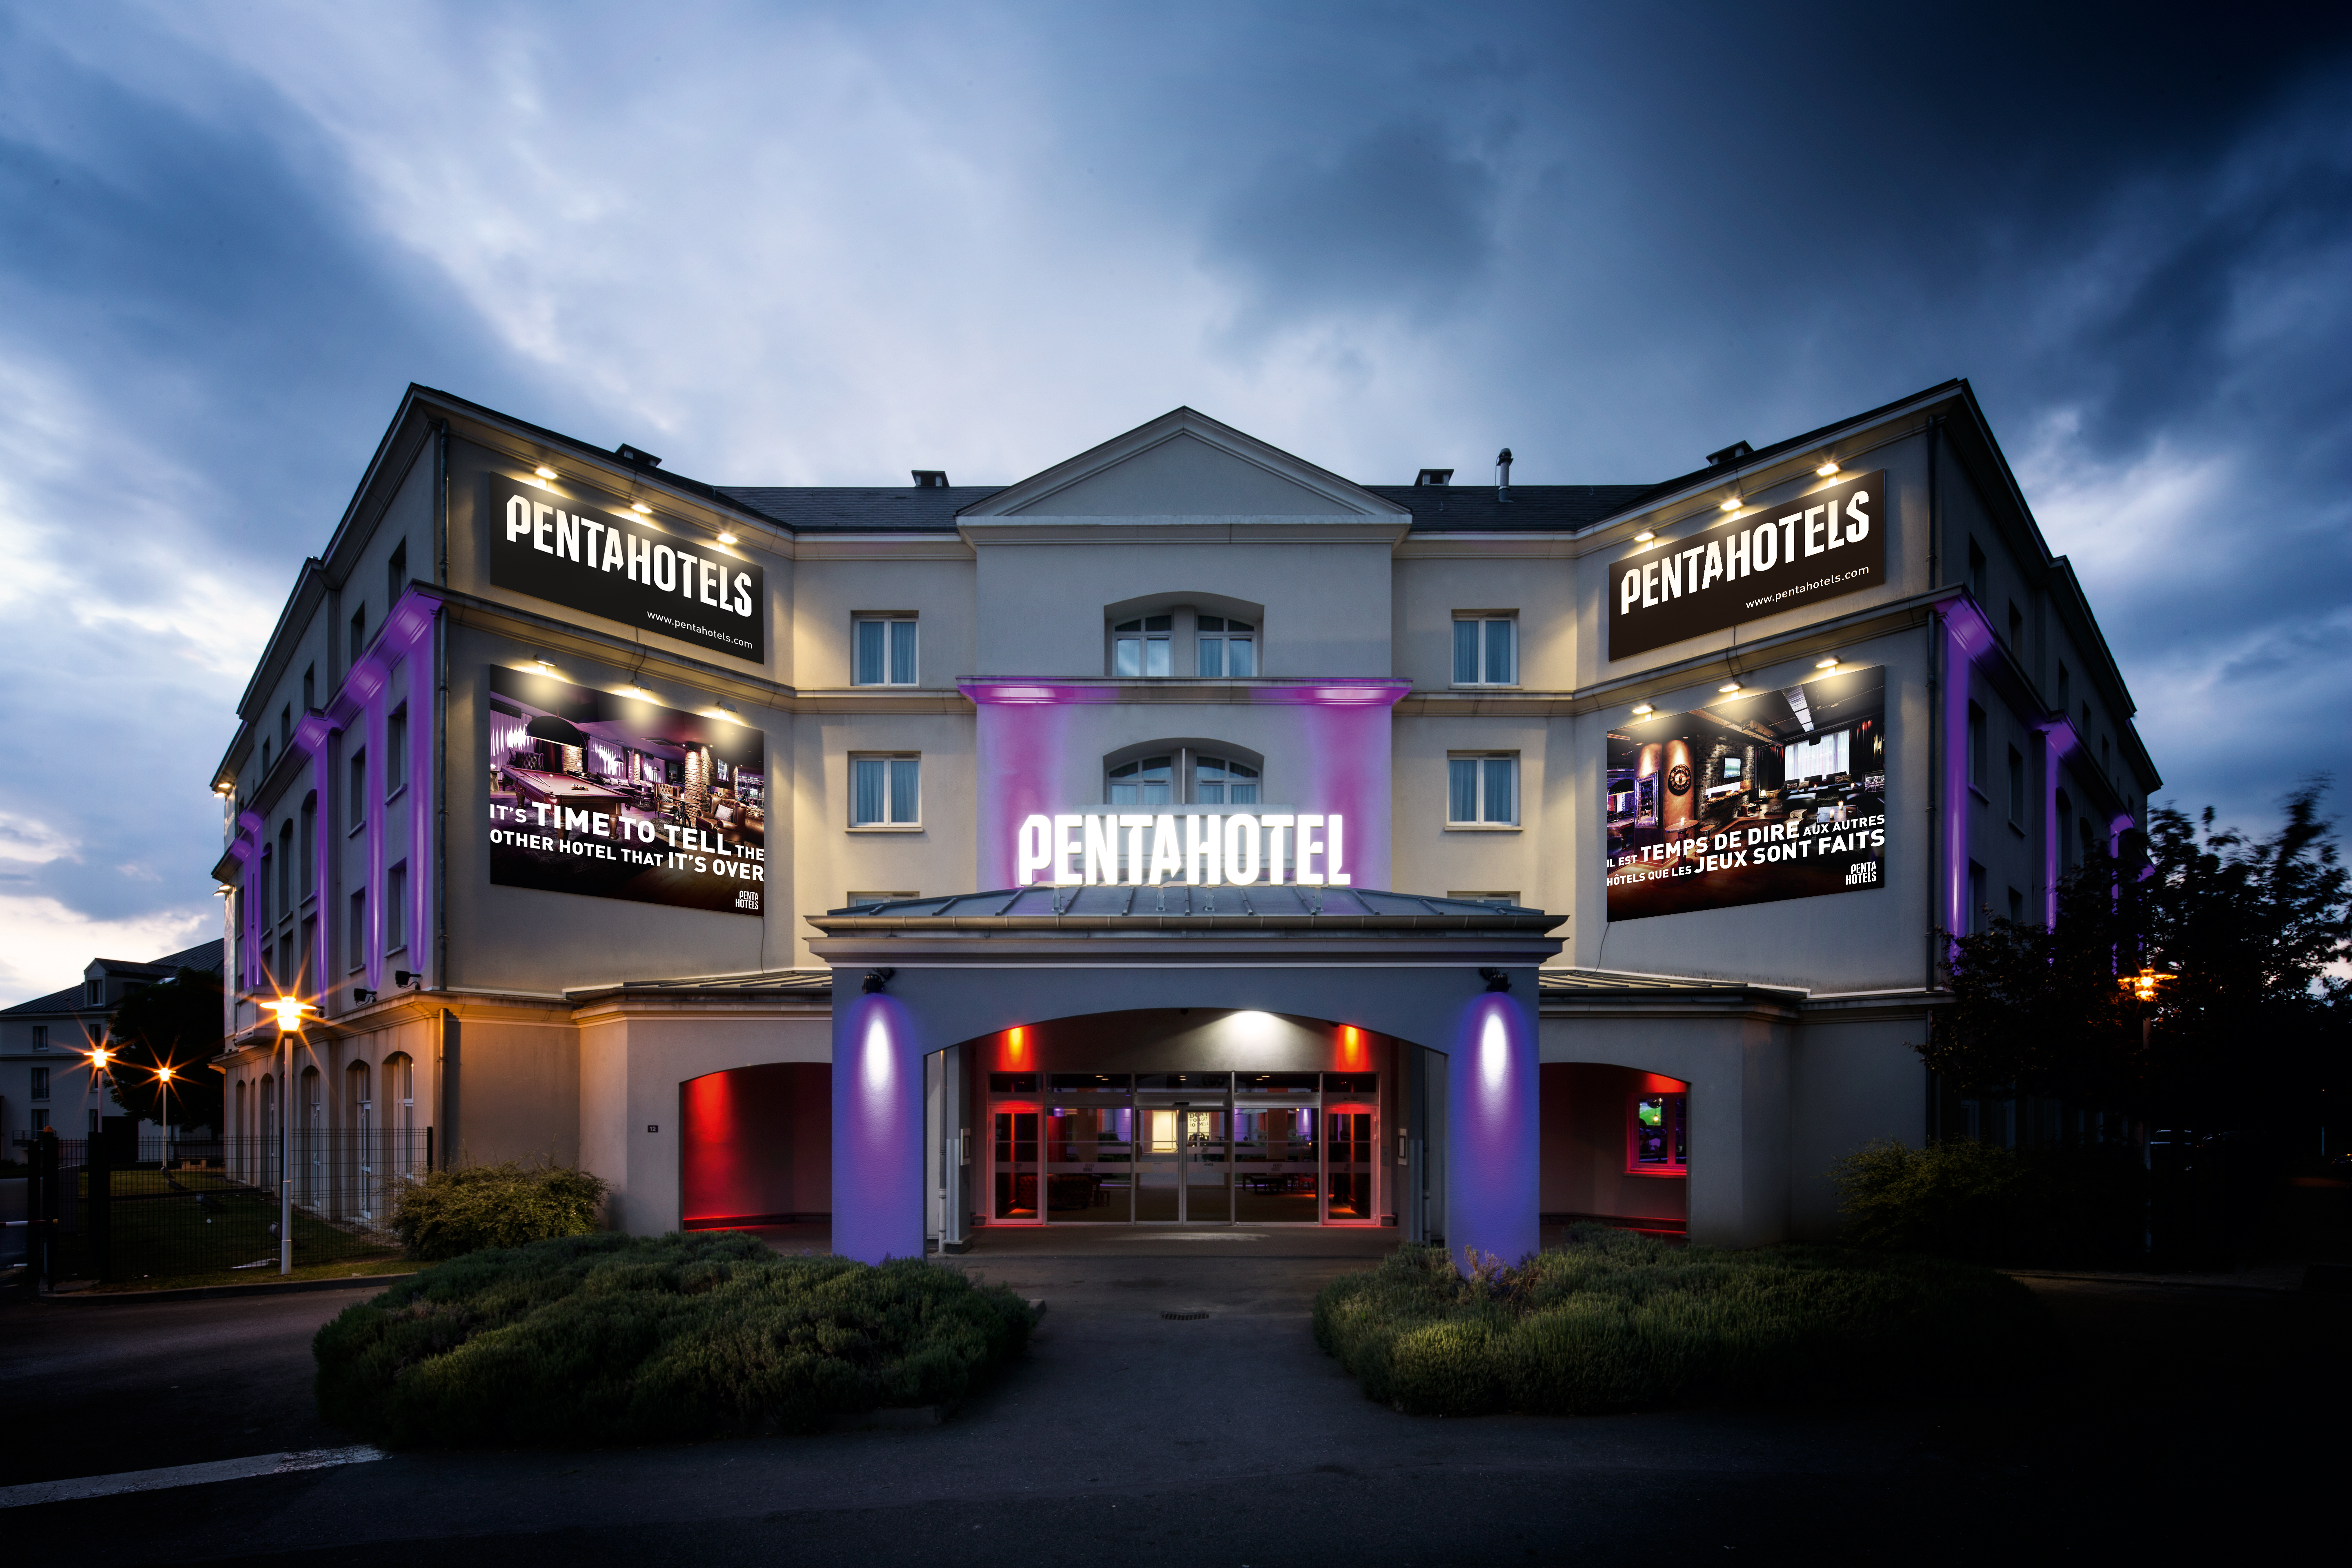 Pentahotel Paris, CDG Airport <br/>80.75 ew <br/> <a href='http://vakantieoplossing.nl/outpage/?id=396b415222e781b744a1bb90f33222ff' target='_blank'>View Details</a>